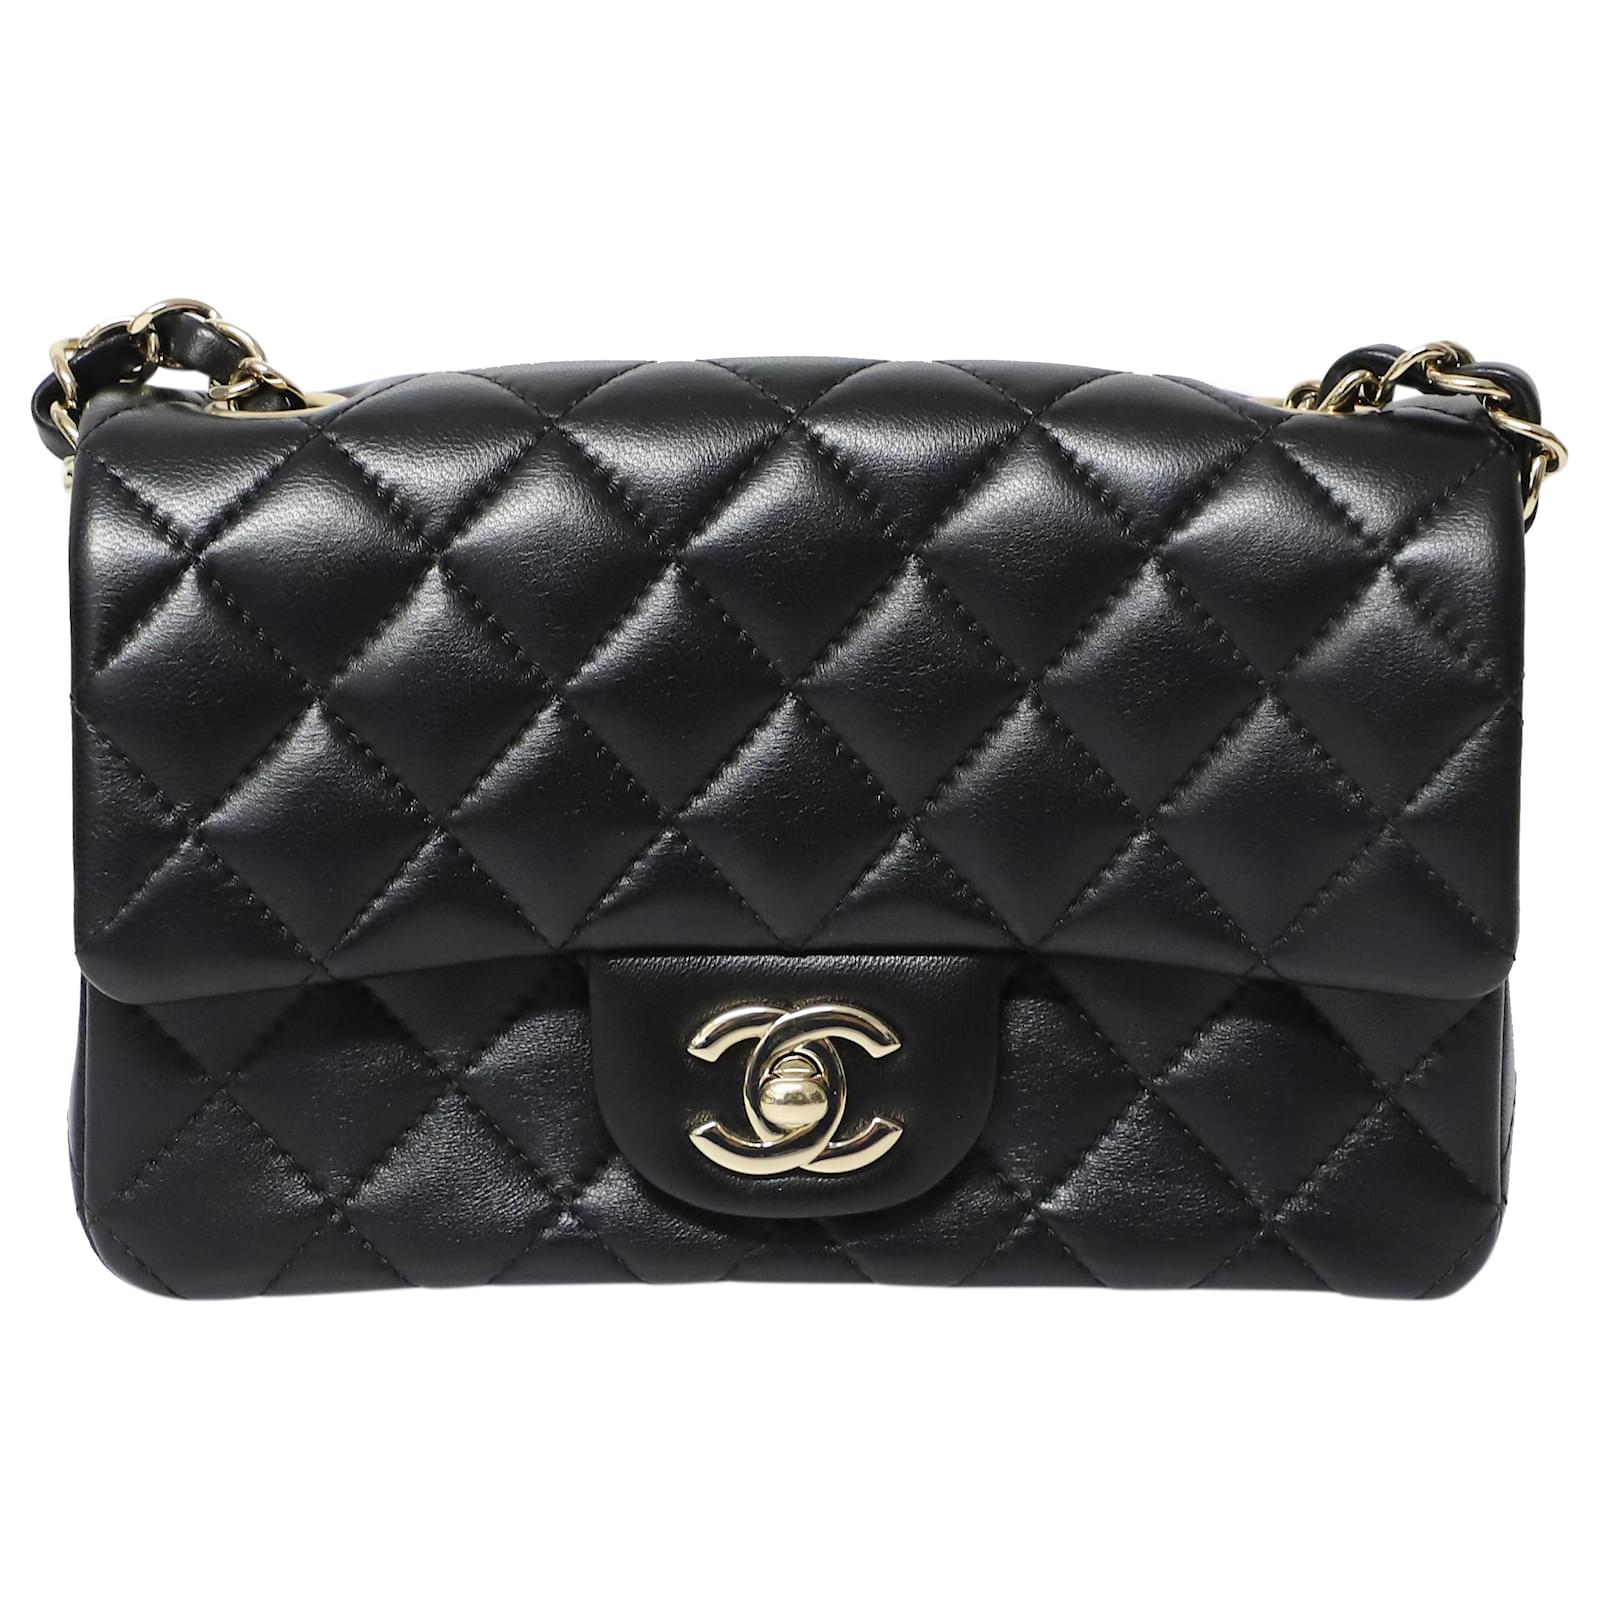 Chanel Quilted Mini Rectangular Flap Purse in Black Lambskin